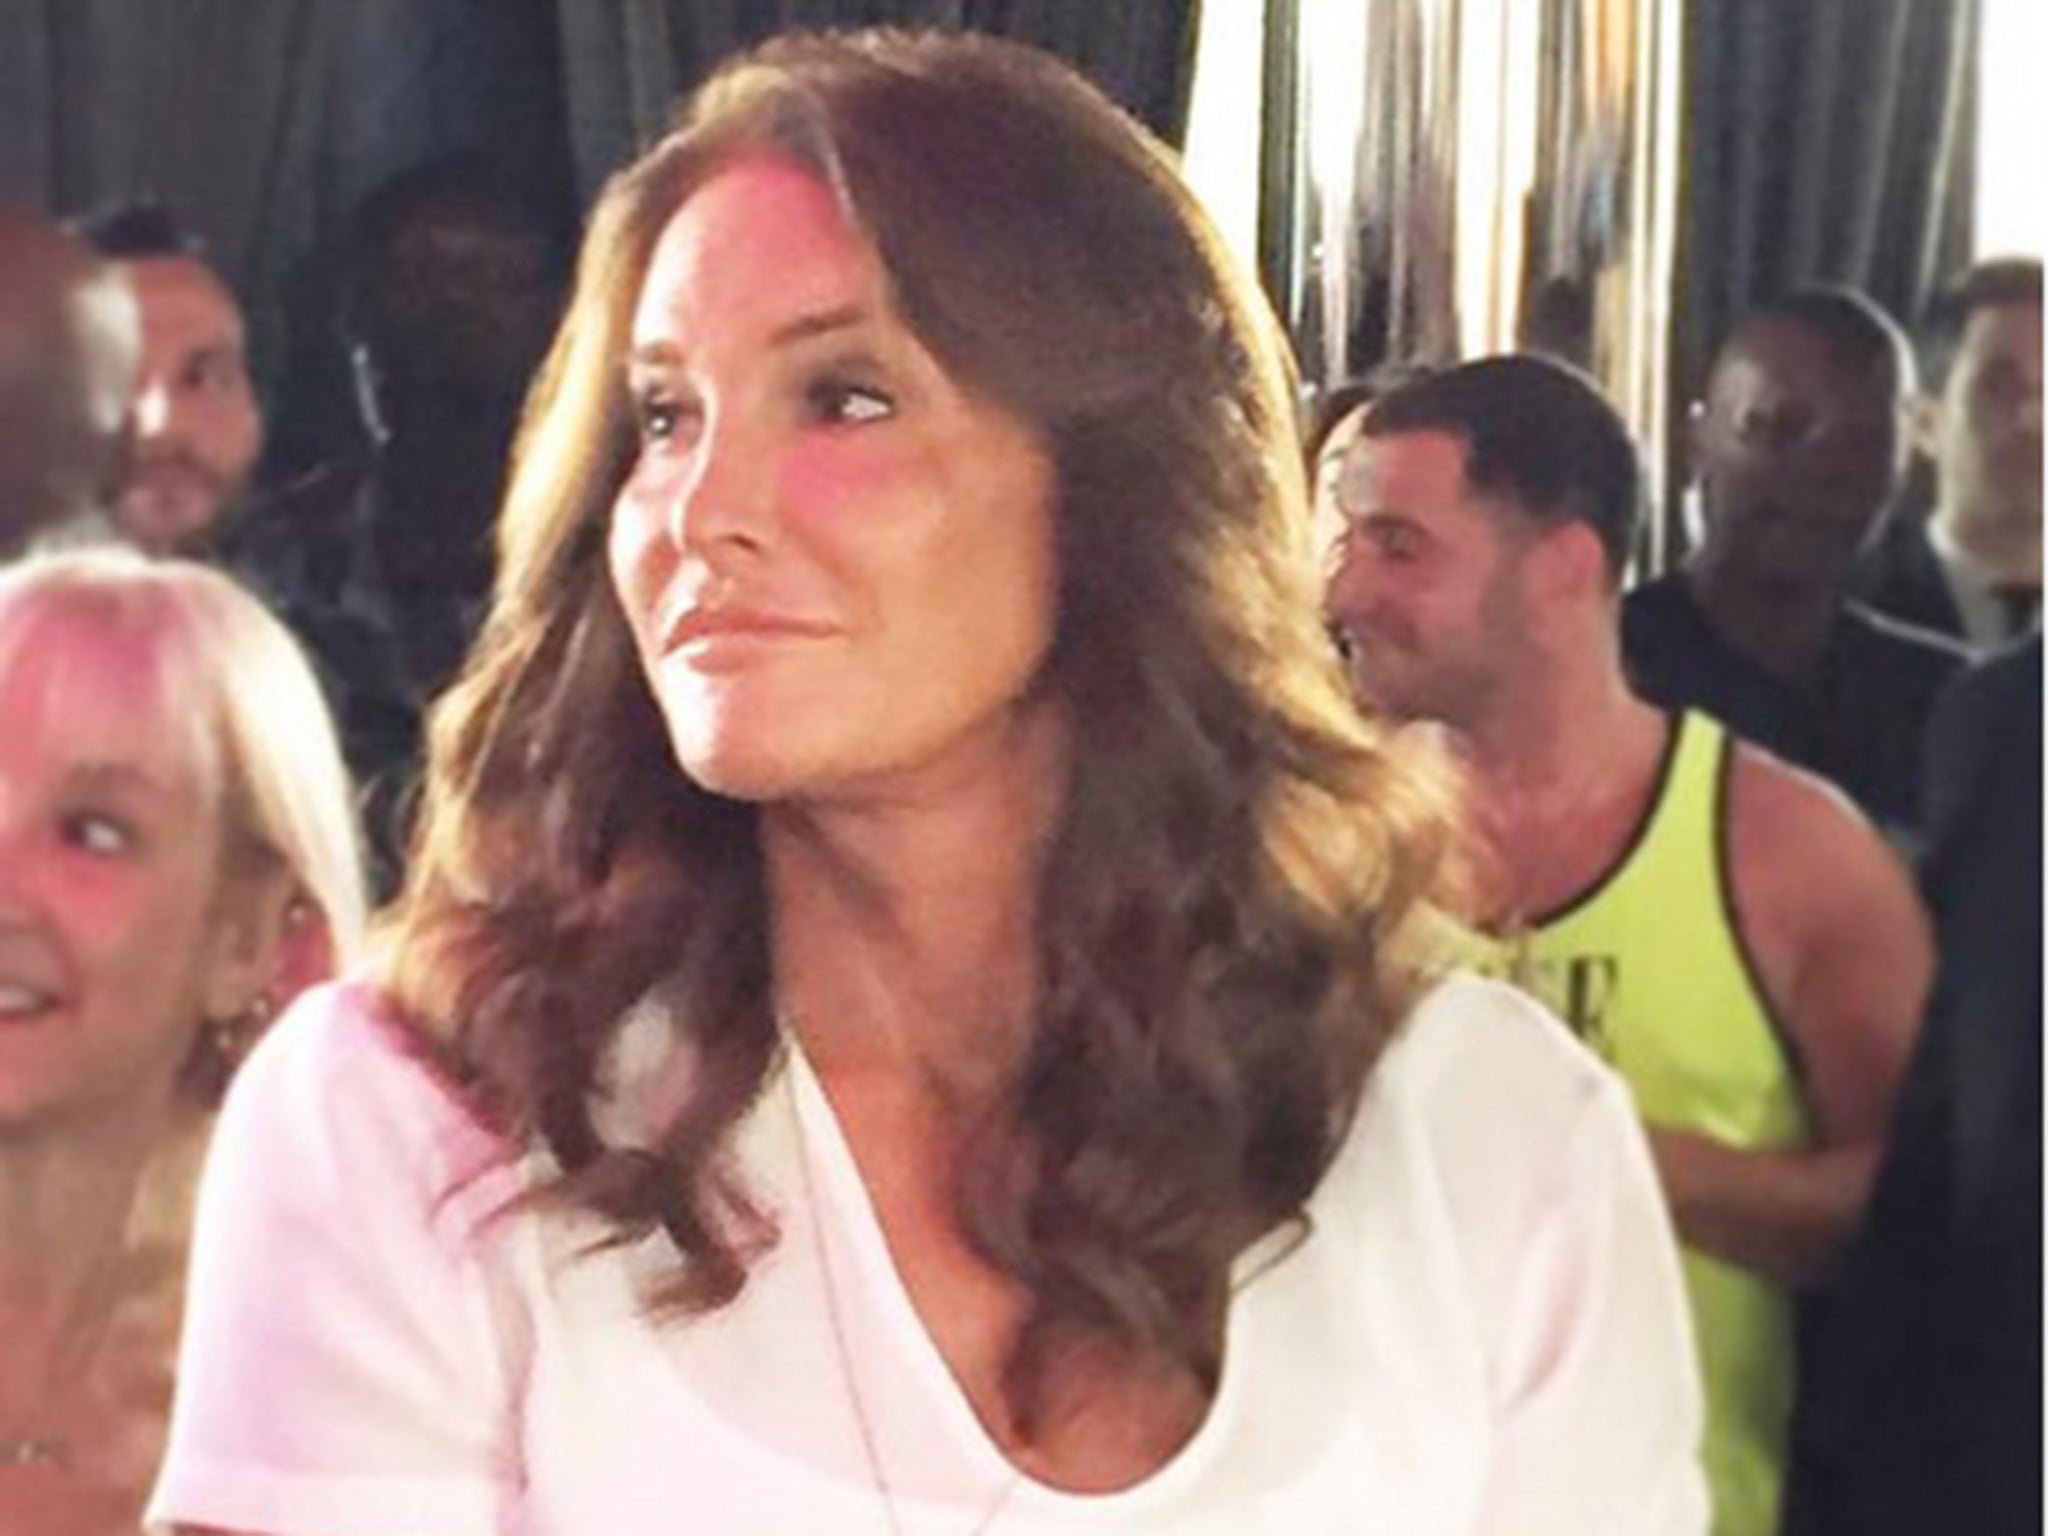 Caitlyn Jenner at NYC Pride 2015